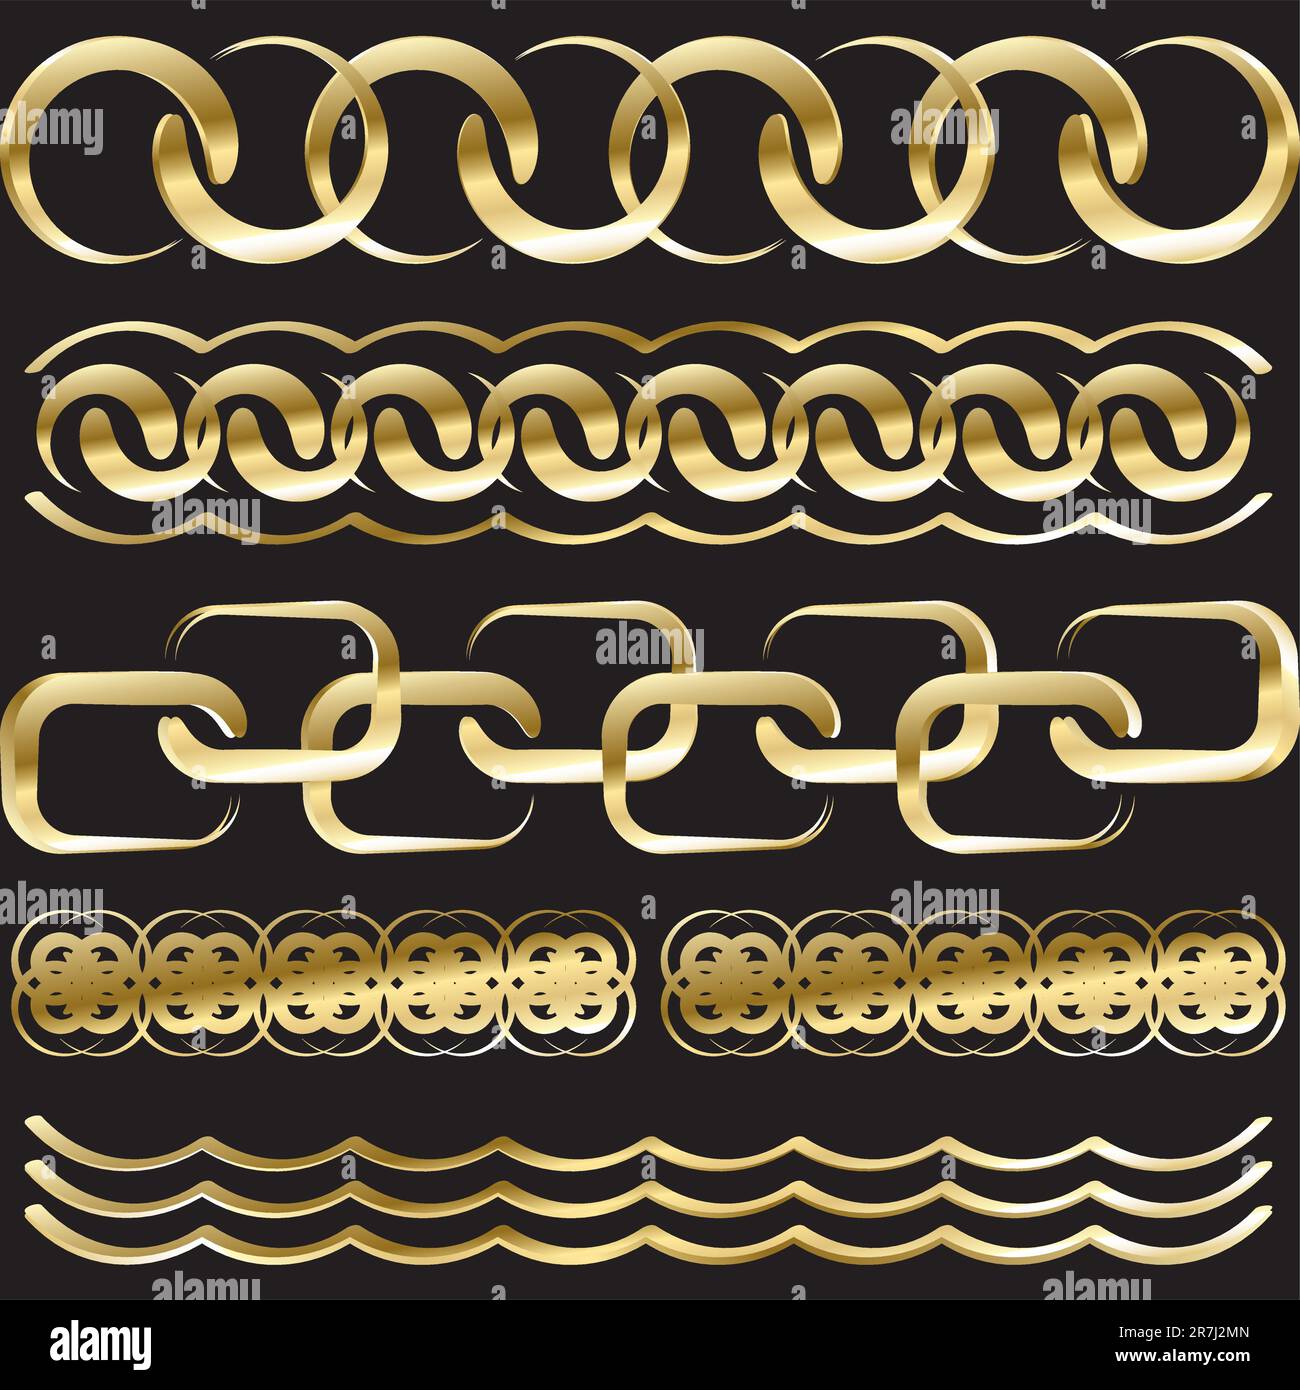 vector gold chains on a black background Stock Vector